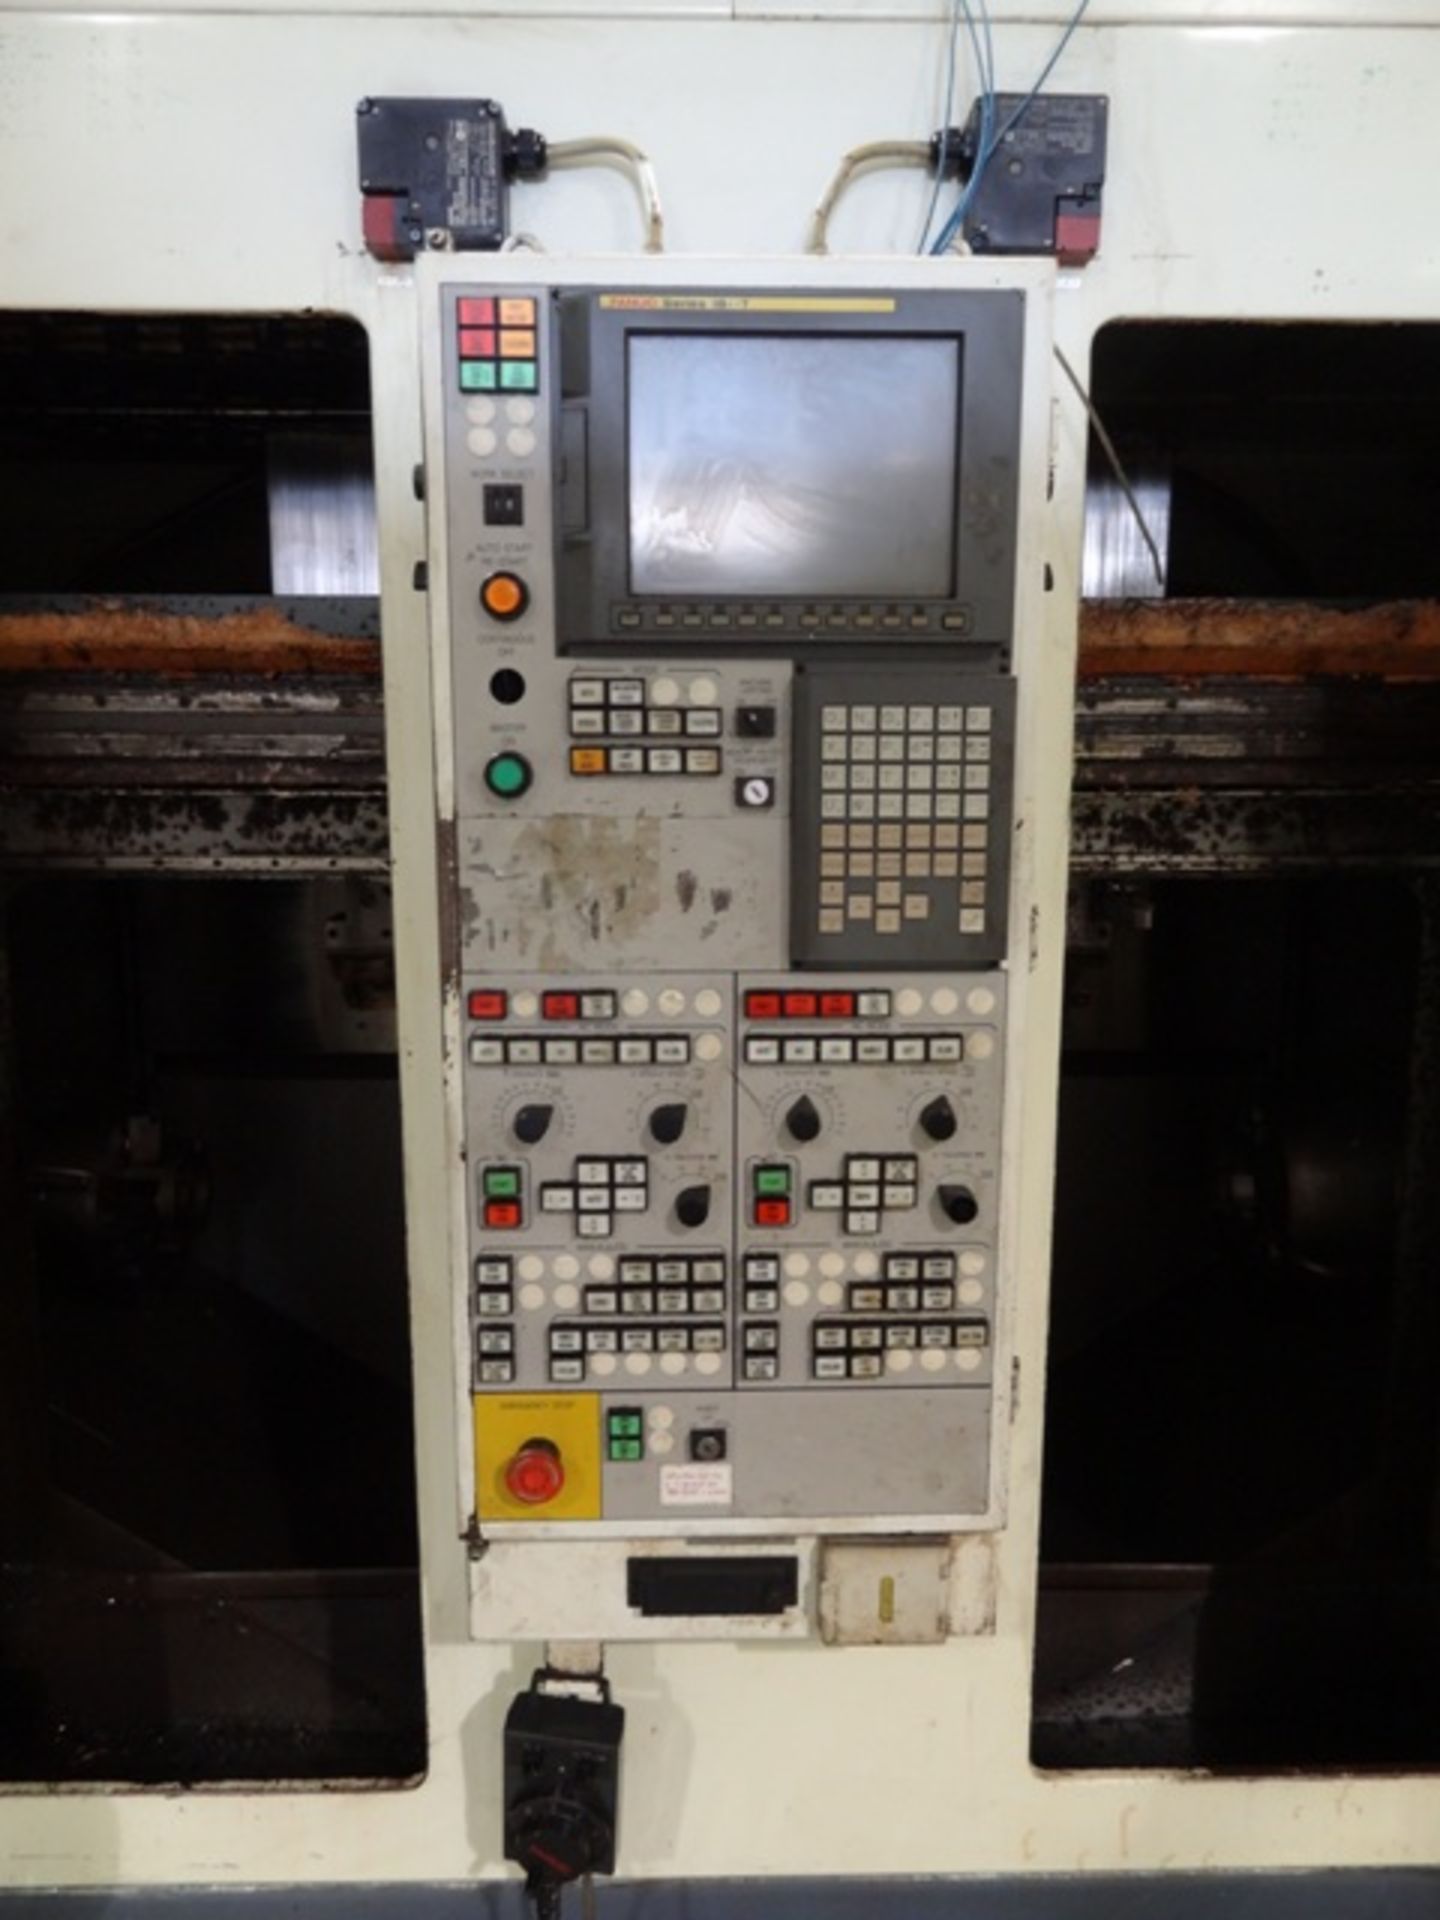 FUJI ANW-30T2 TWIN SPINDLE CNC LATHE WITH GANTRY LOADER, SN 13890, YEAR 2003 - Image 2 of 3